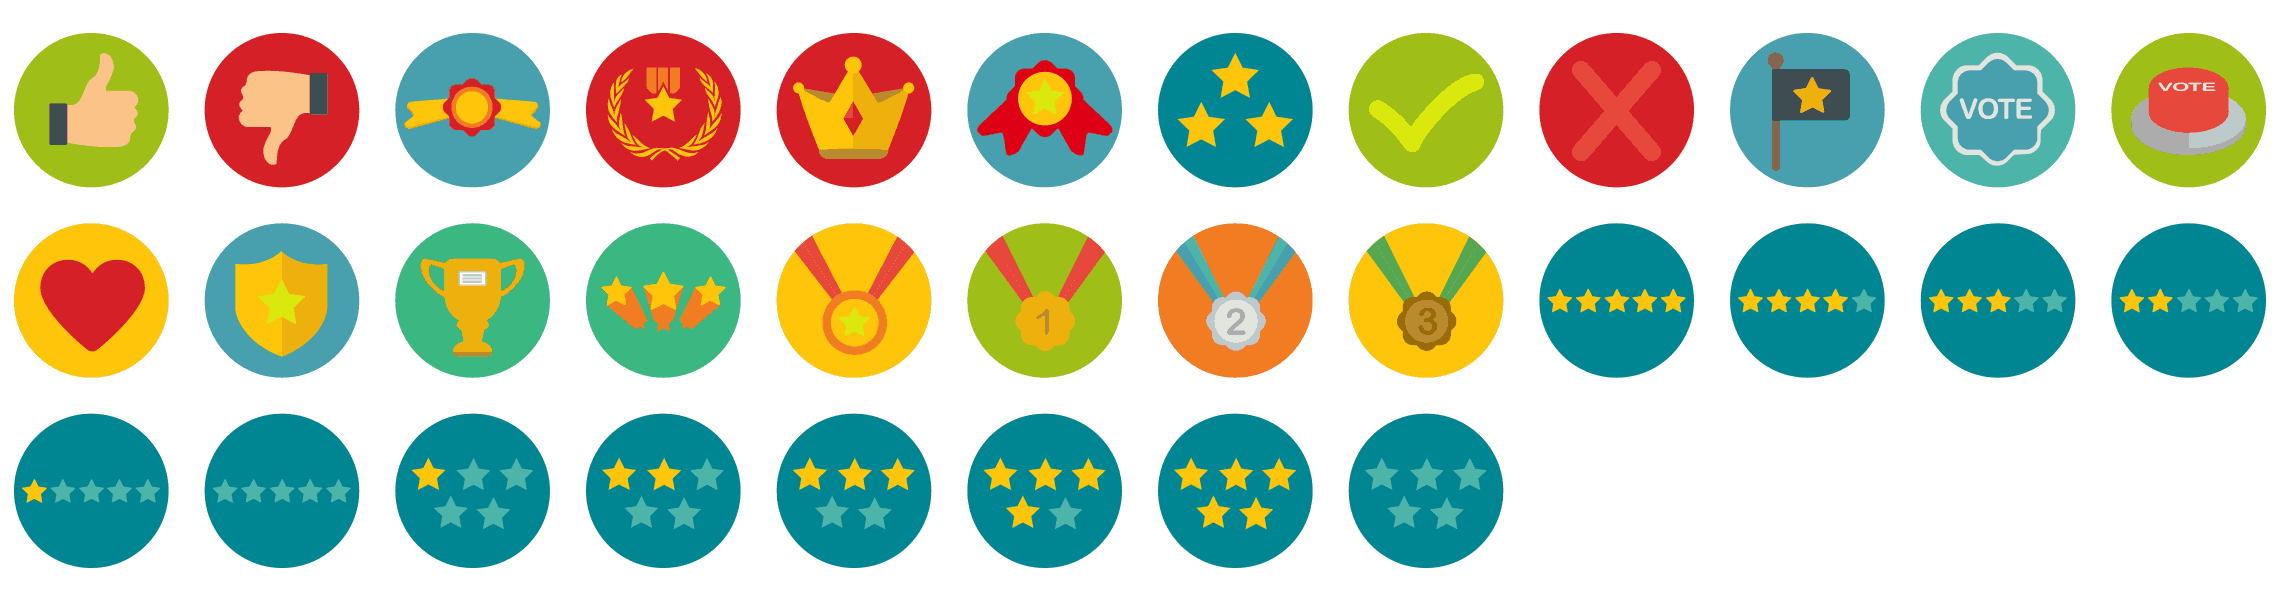 badges-and-votes-flat-icons-vol-1-preview